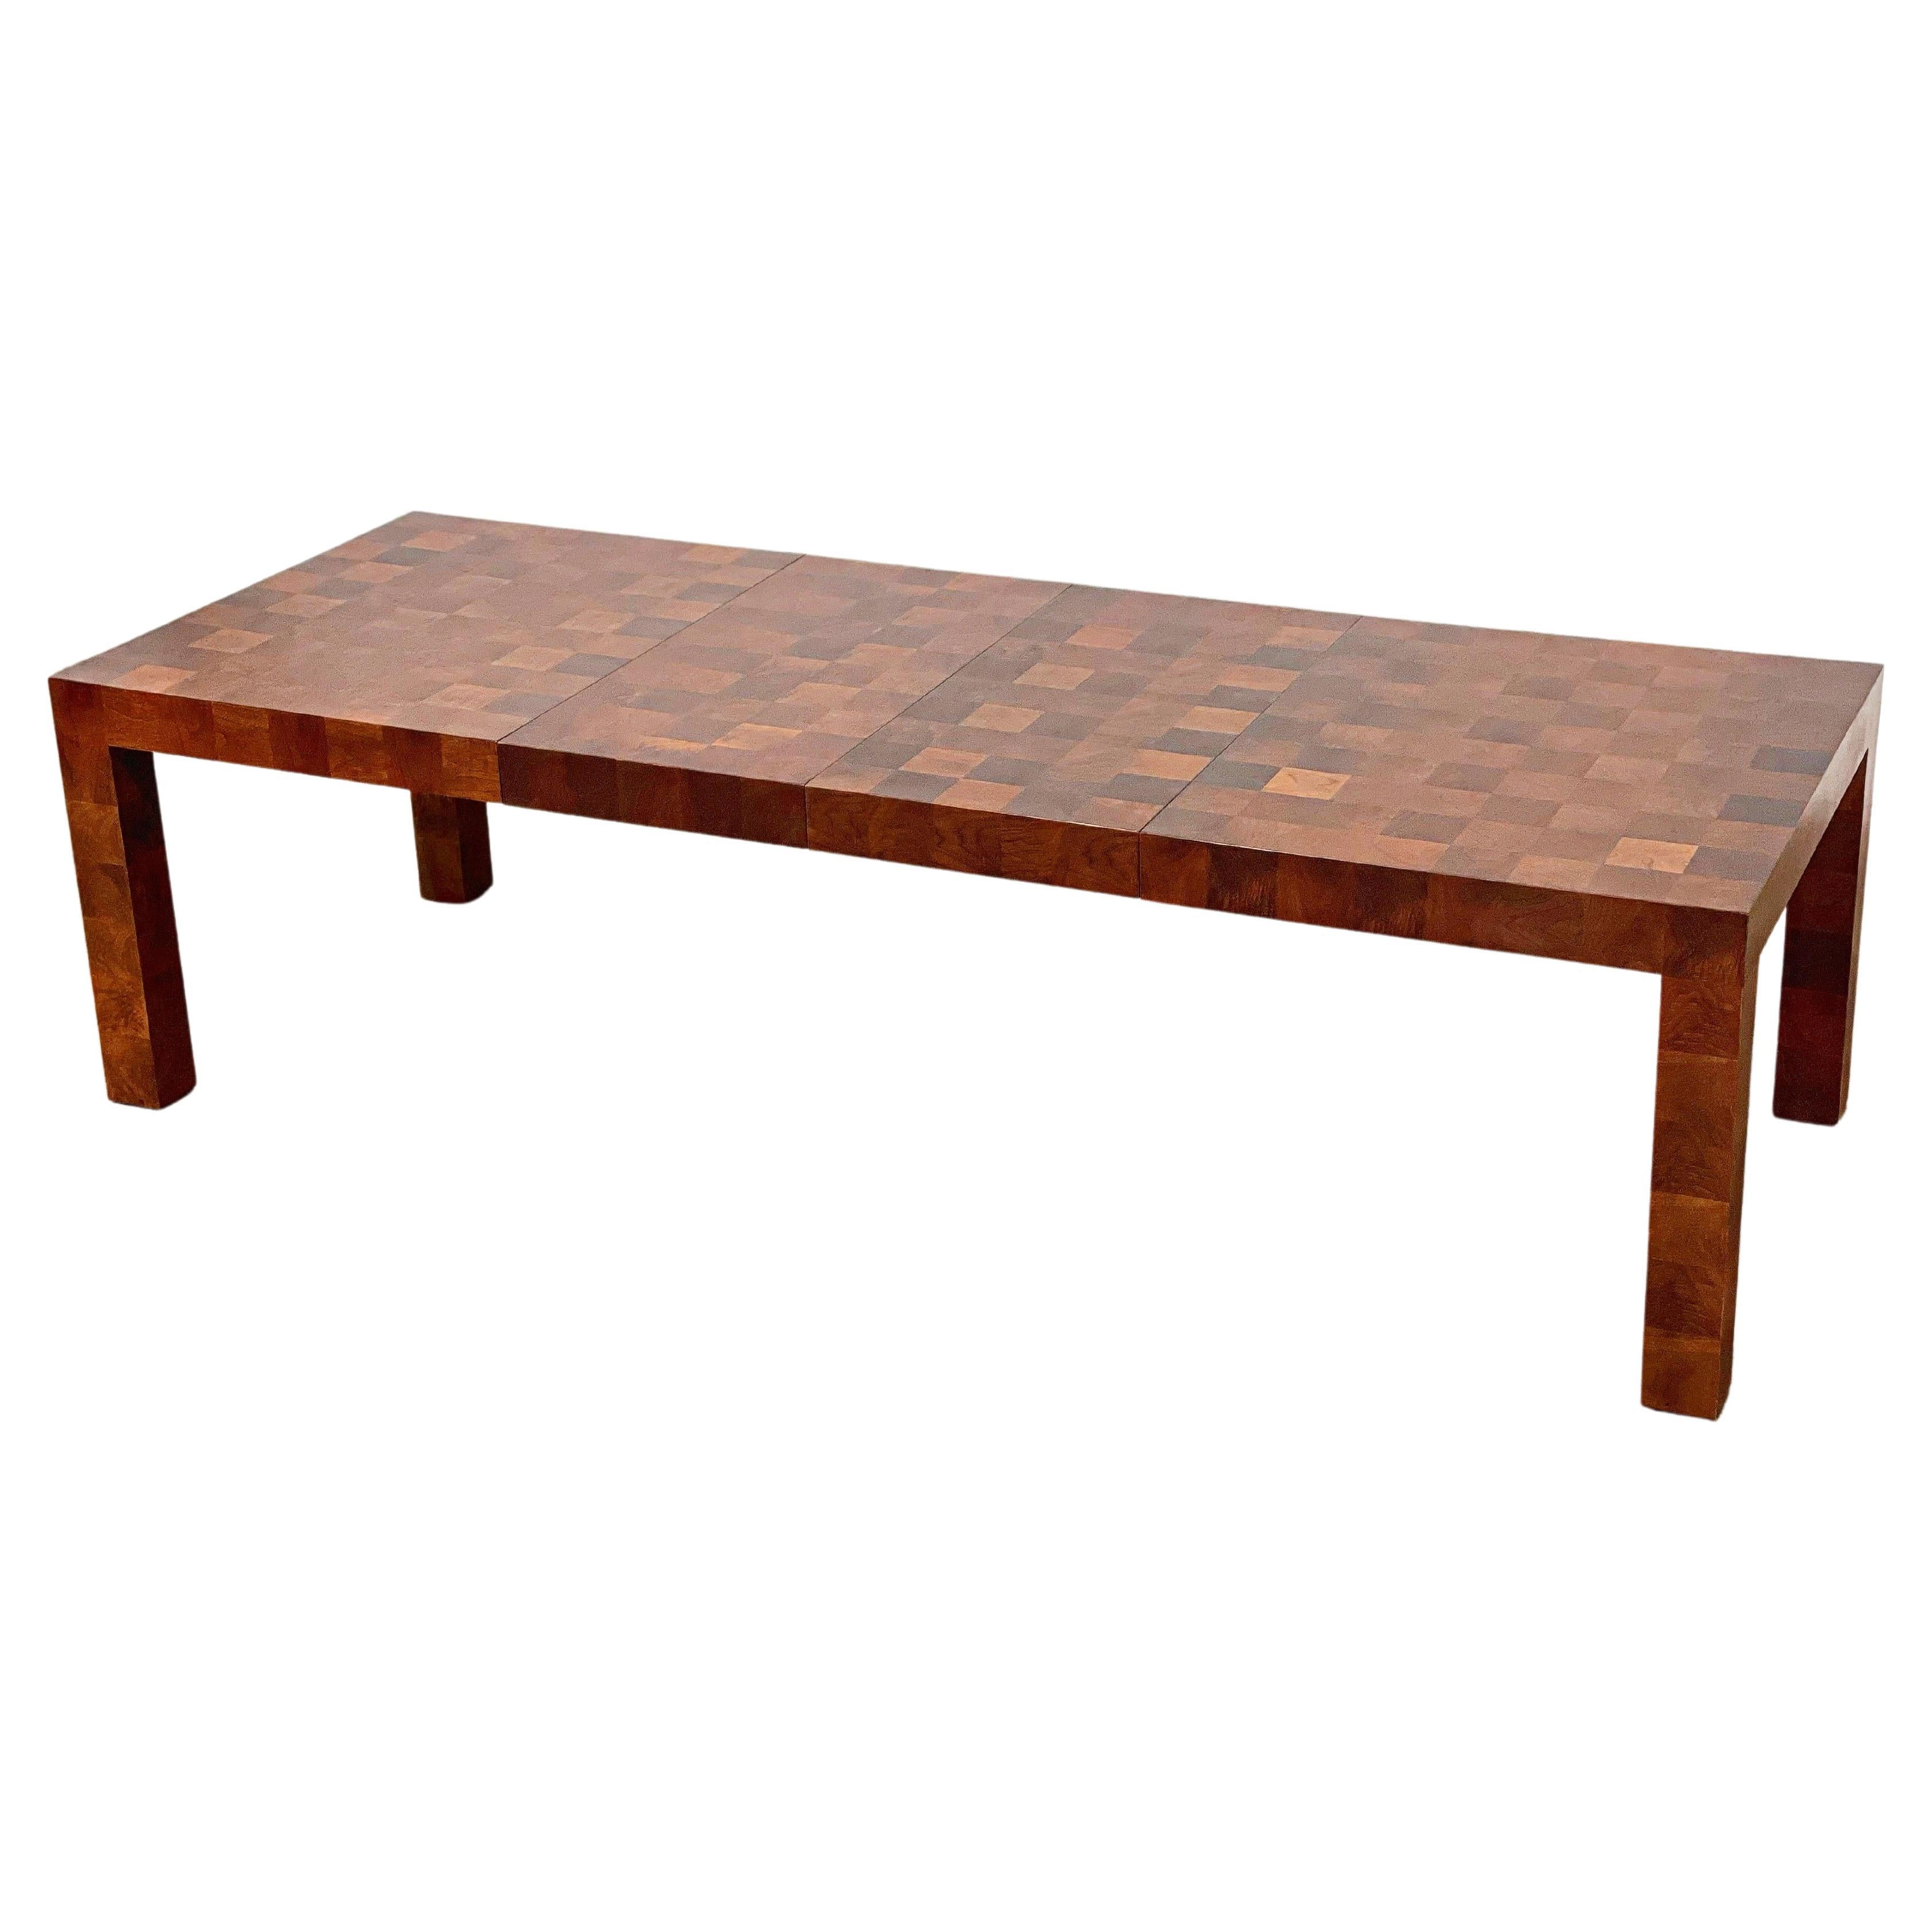 Milo Baughman for Thayer Coggin Parsons Dining Table in Patchwork Walnut Burl